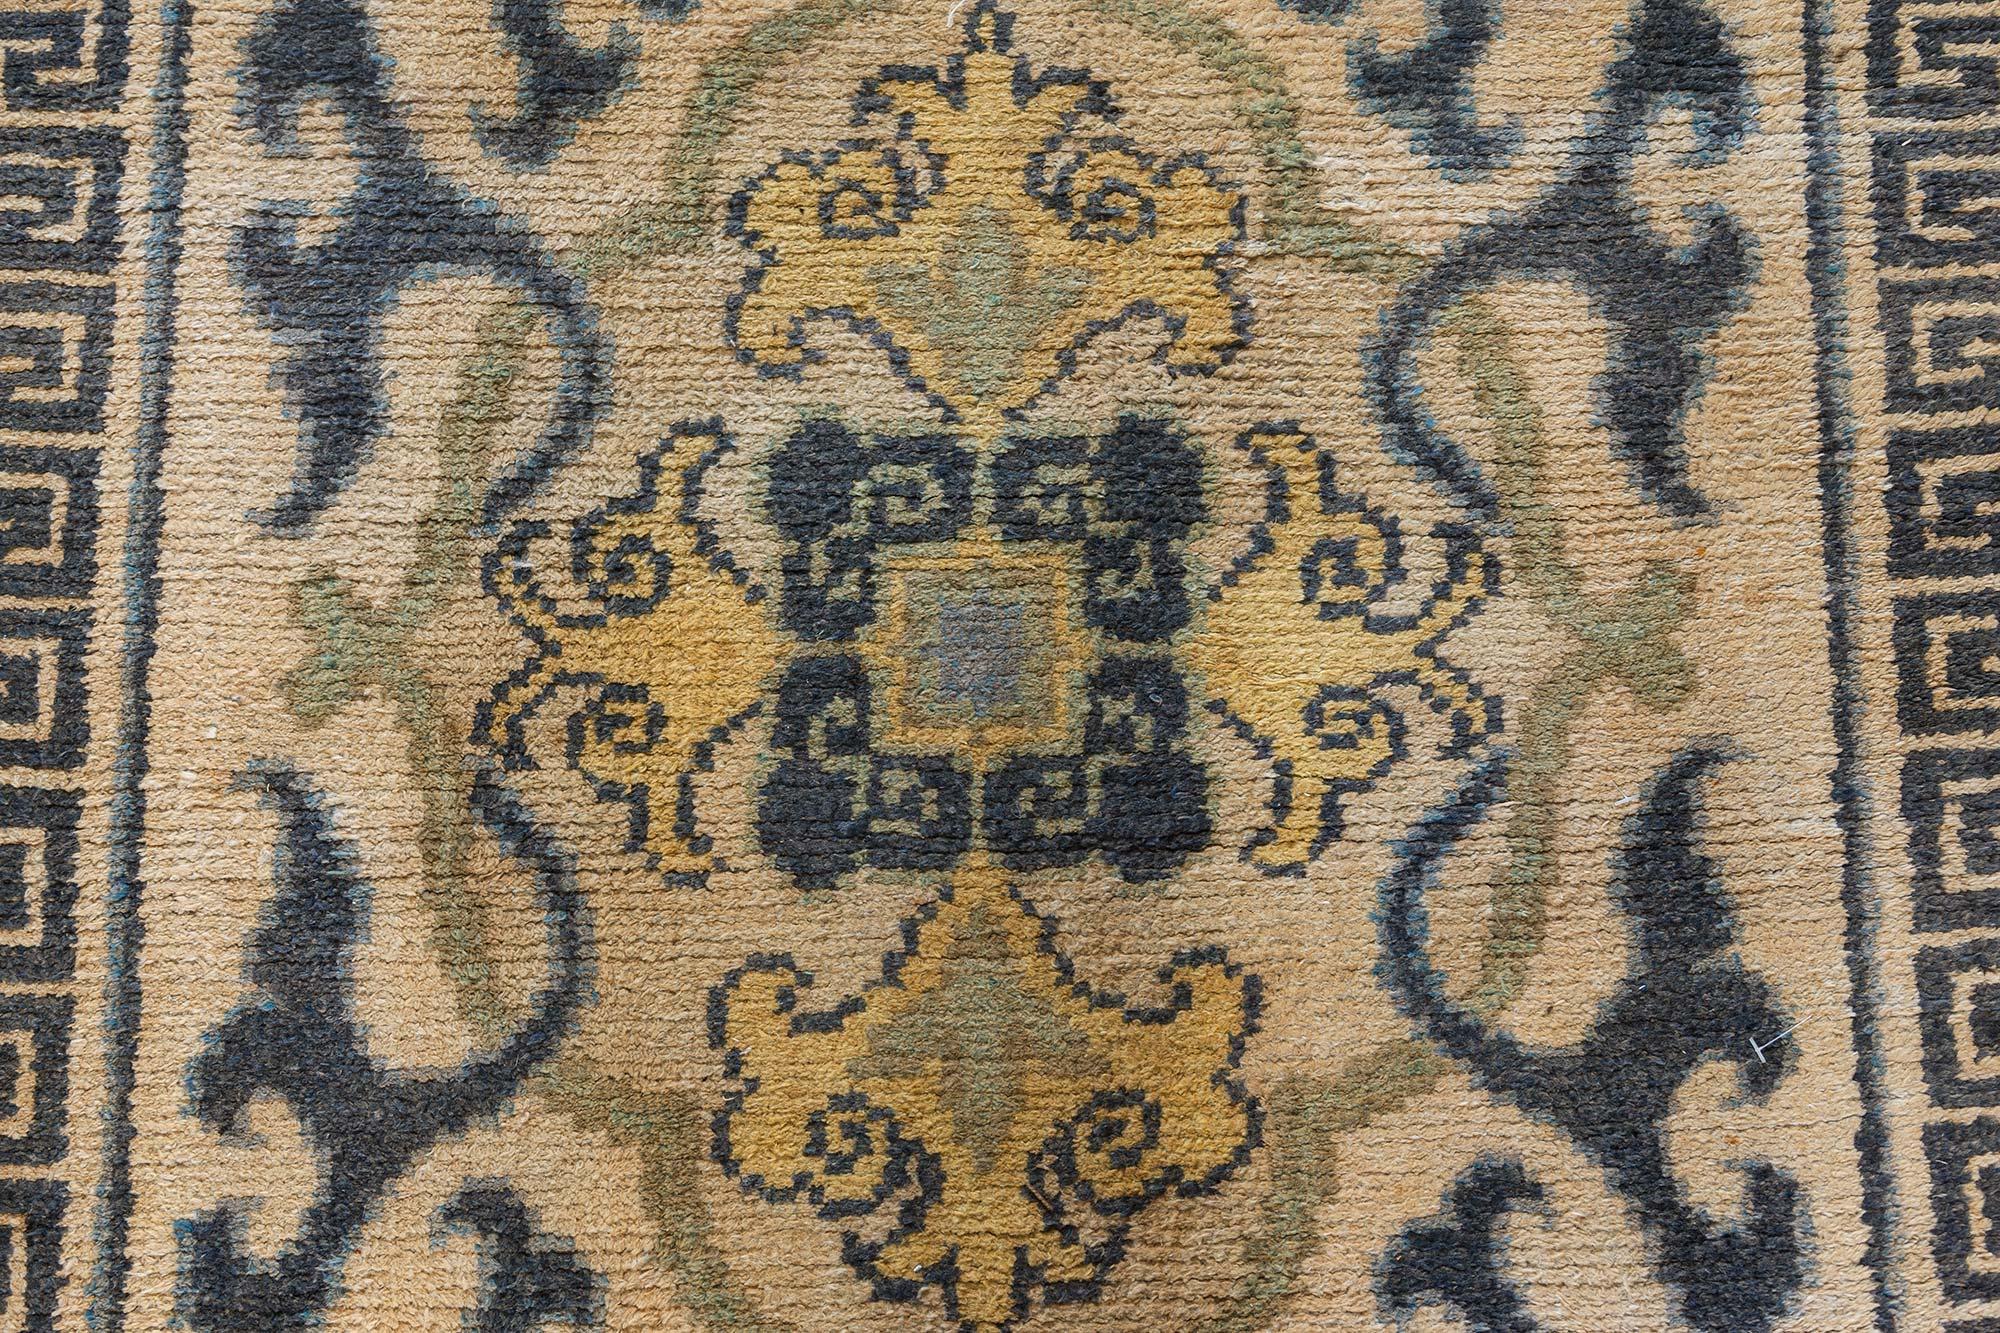 Mid-20th Century Floral Beige, Blue, Green, Yellow Japanese Handwoven Wool Rug
Size: 3'1